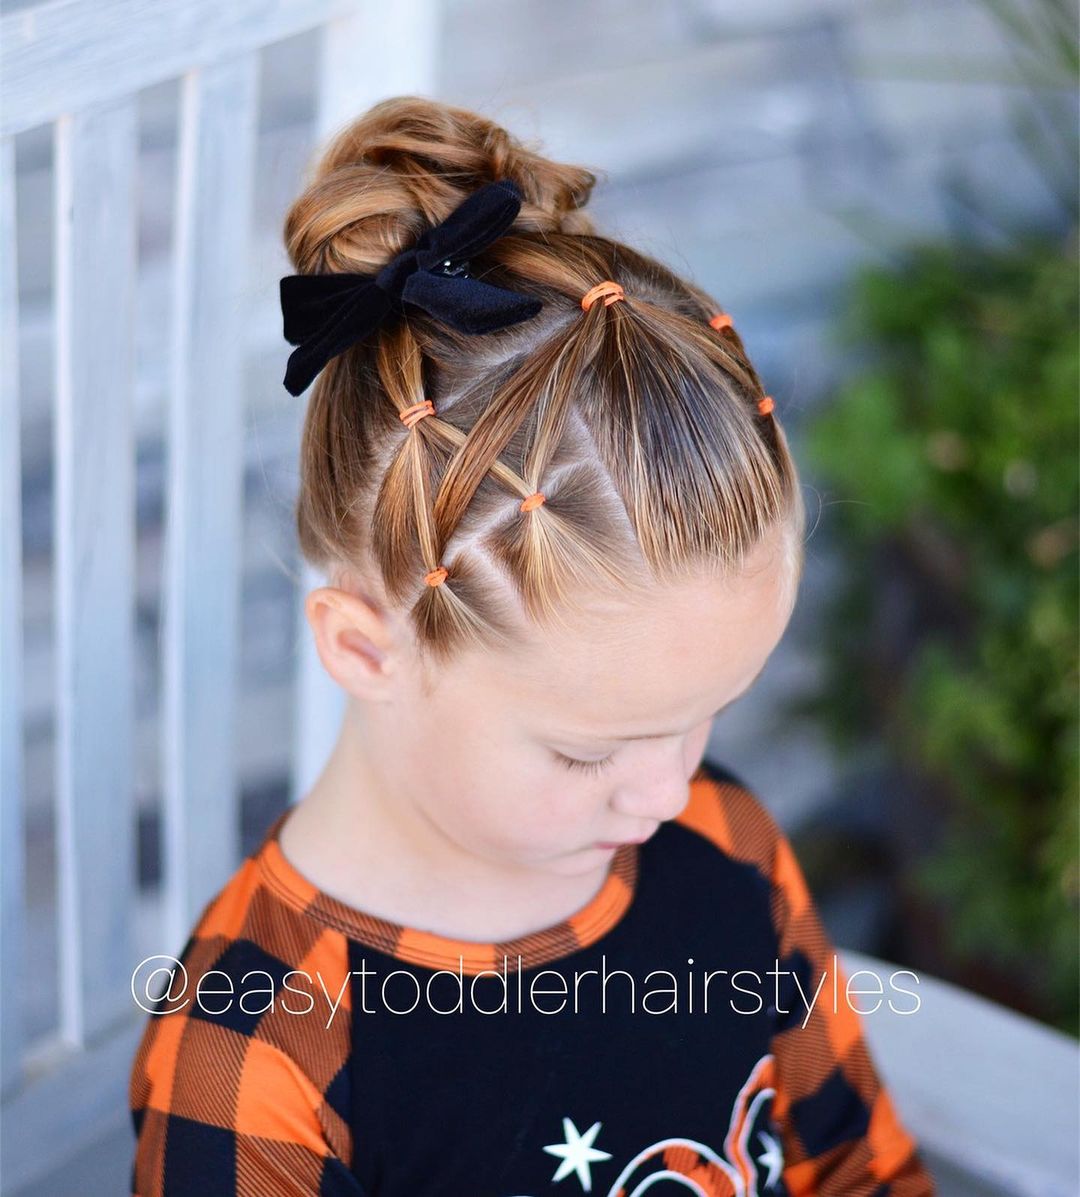 rubber band hairstyle into a high messy bun